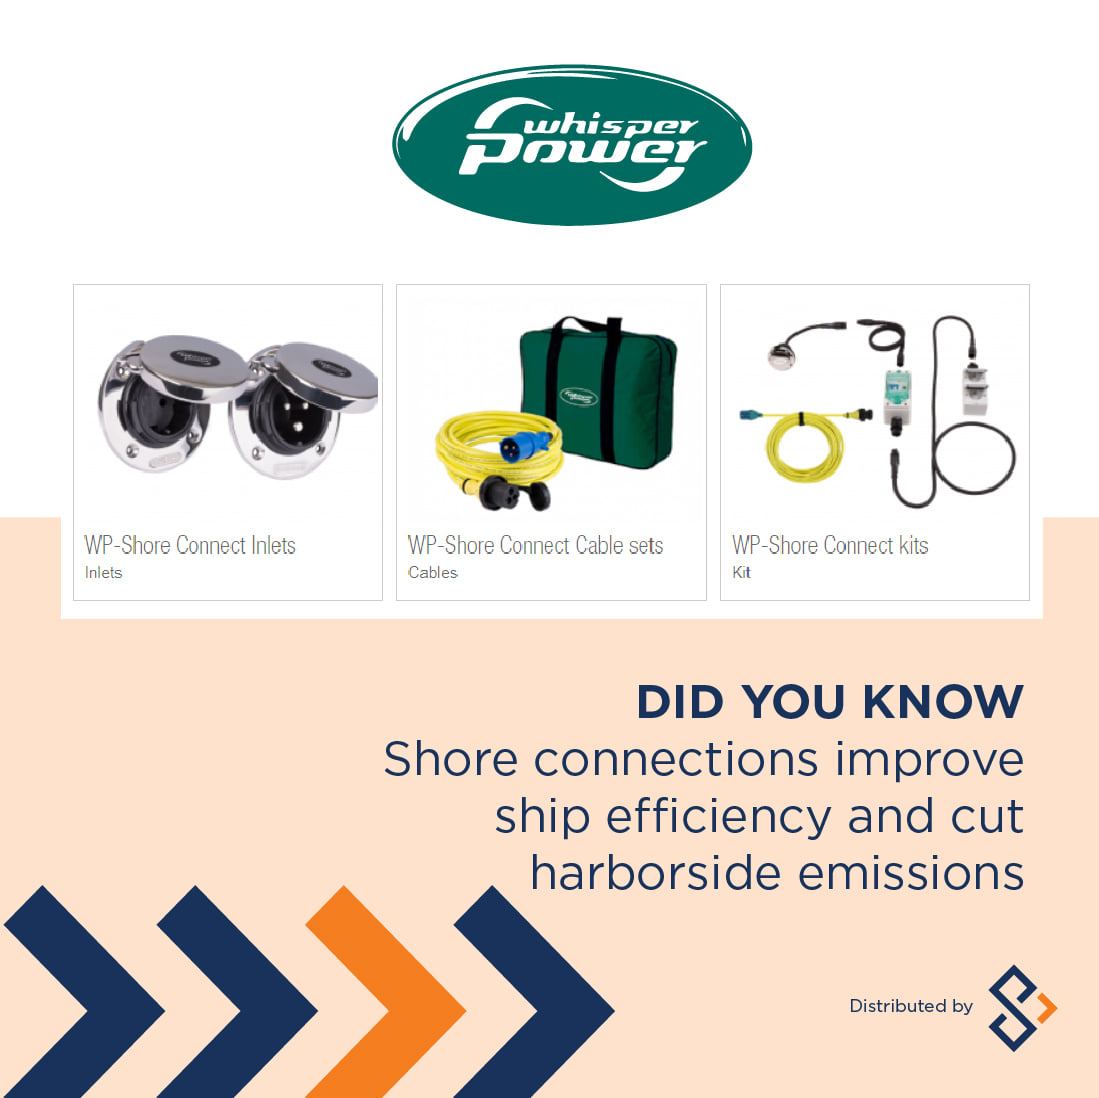 It’s that time of the year again, to replace your ship to shore power cables with Southern Power.
Browse our comprehensive range of OEM WhisperPower stainless steel and polyamide inlets, high class connectors and cables here: whisperpower.com/za/4/30/produc…